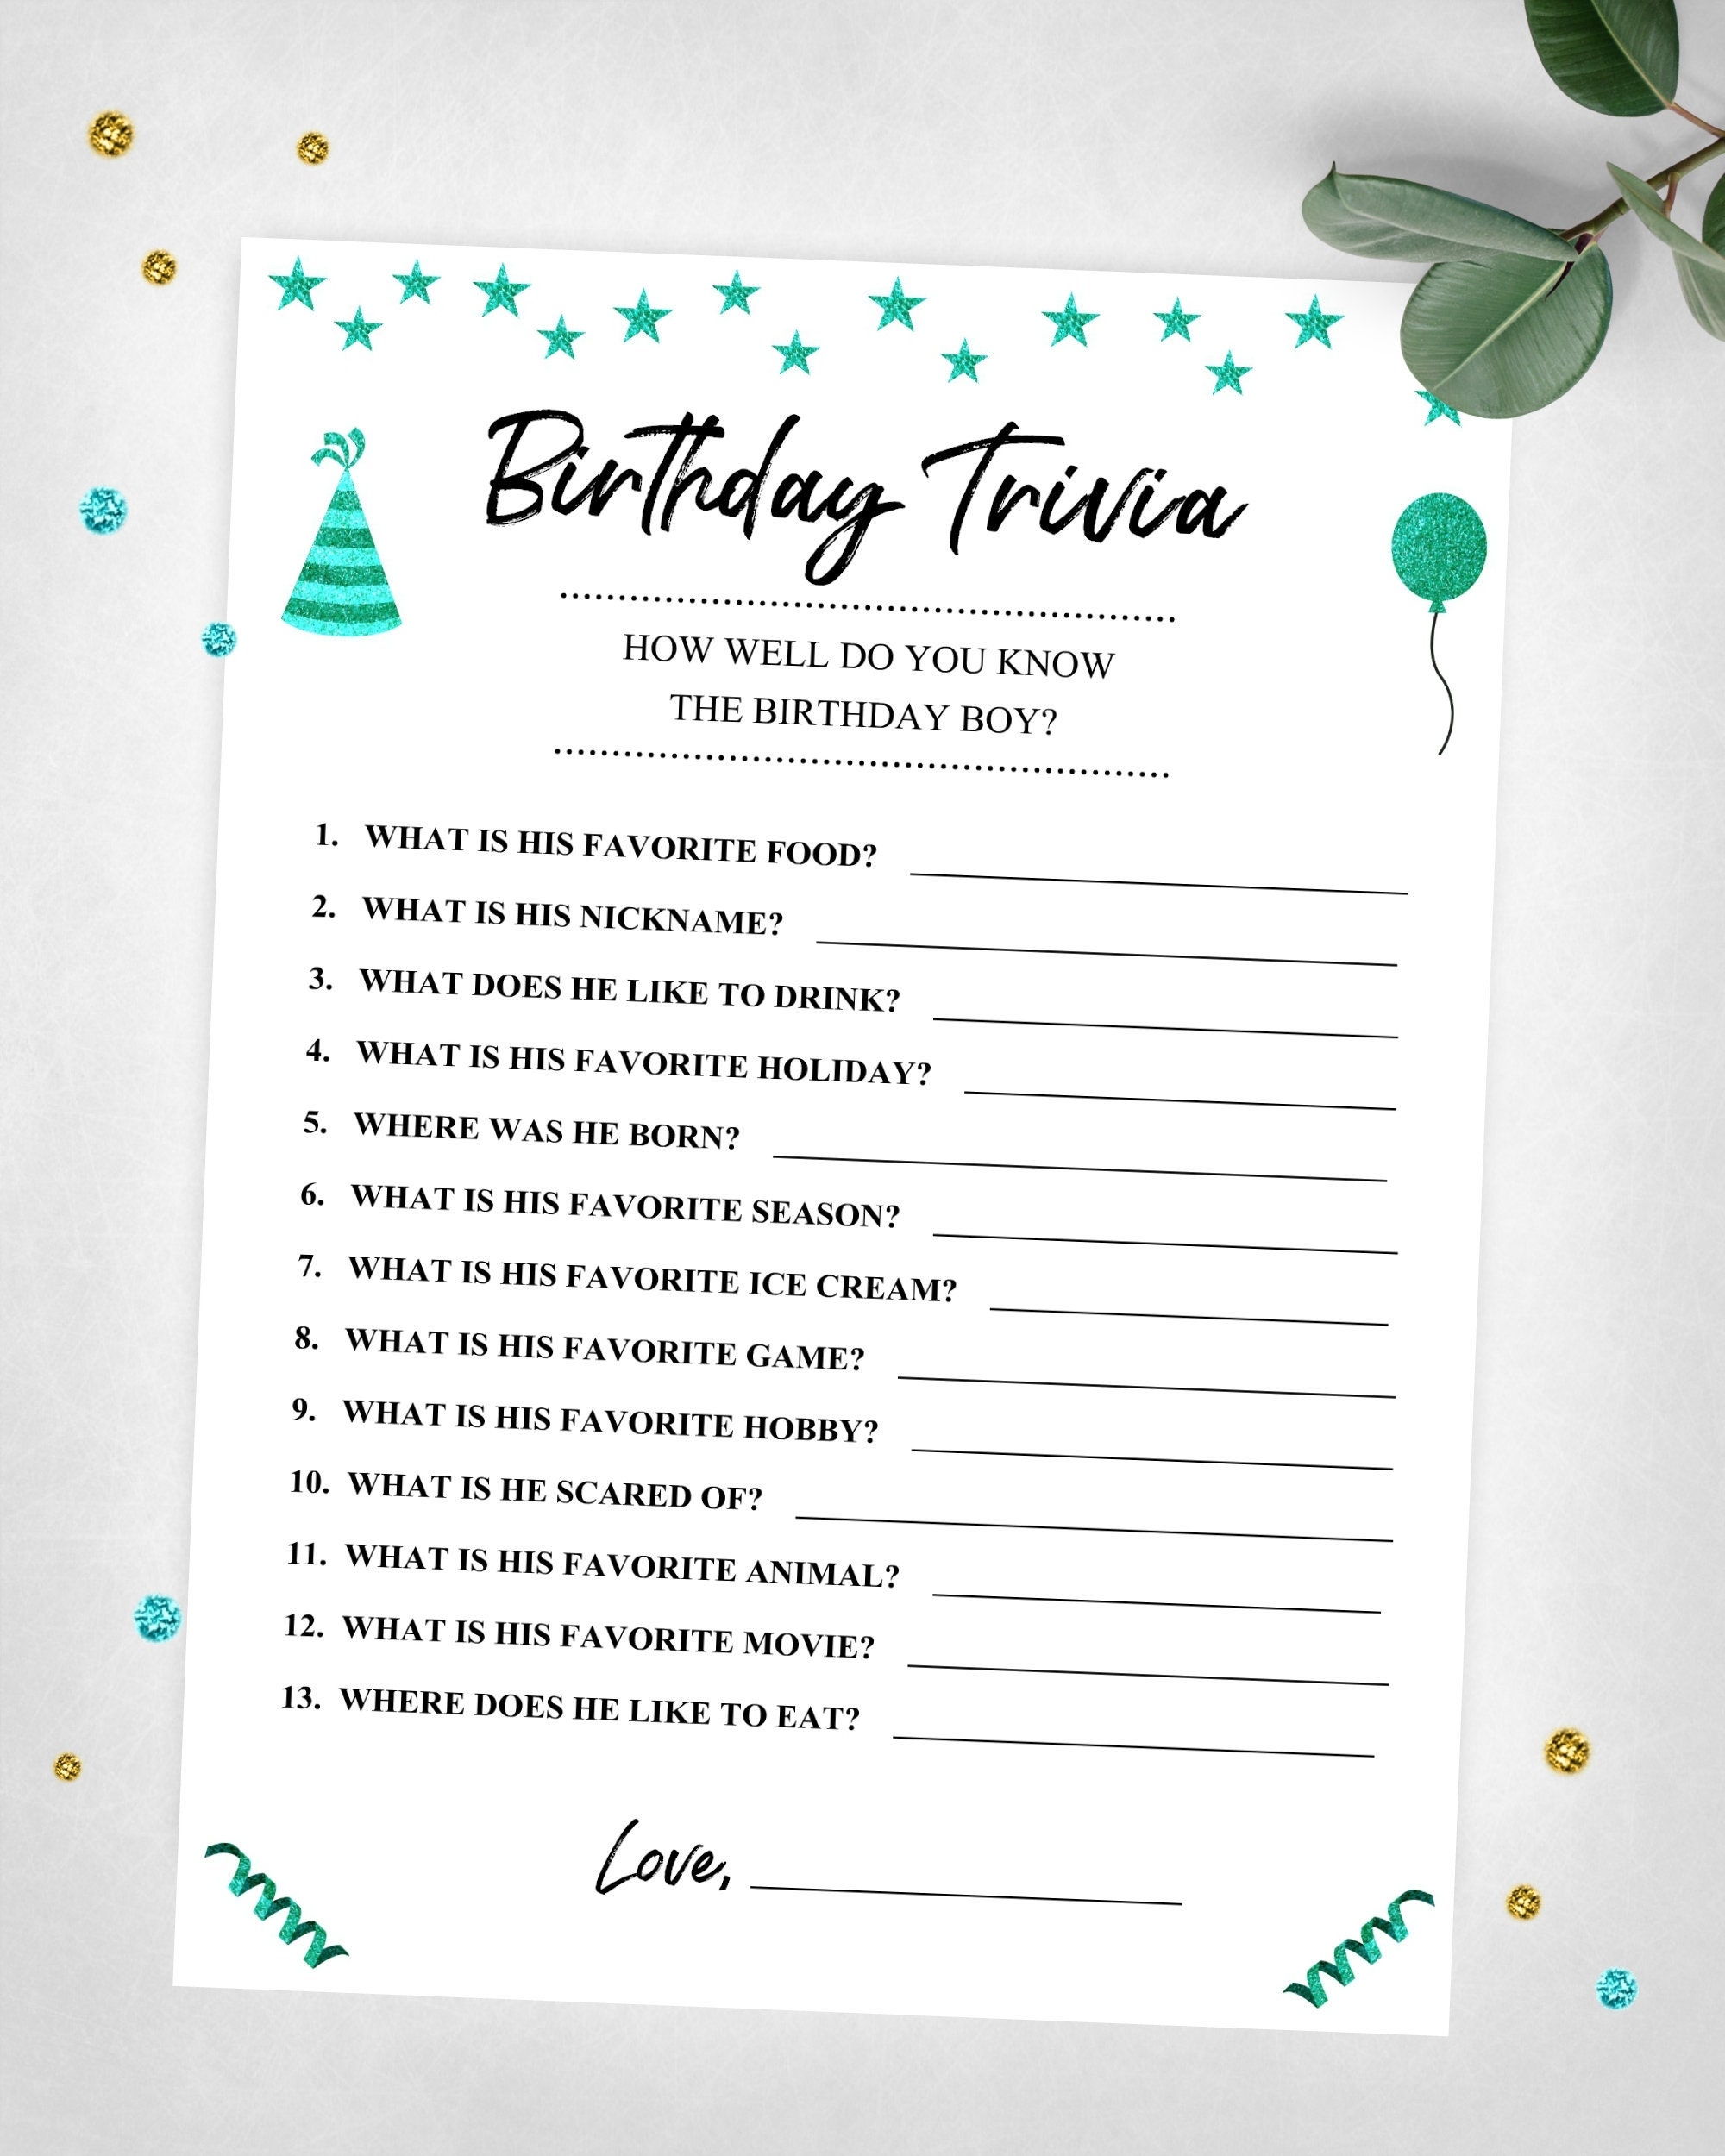 Birthday Trivia How Well Do You Know Me Party Game Teen Tween Boy Birthday Game Instant Digital Download Printable Game Keepsake Etsy